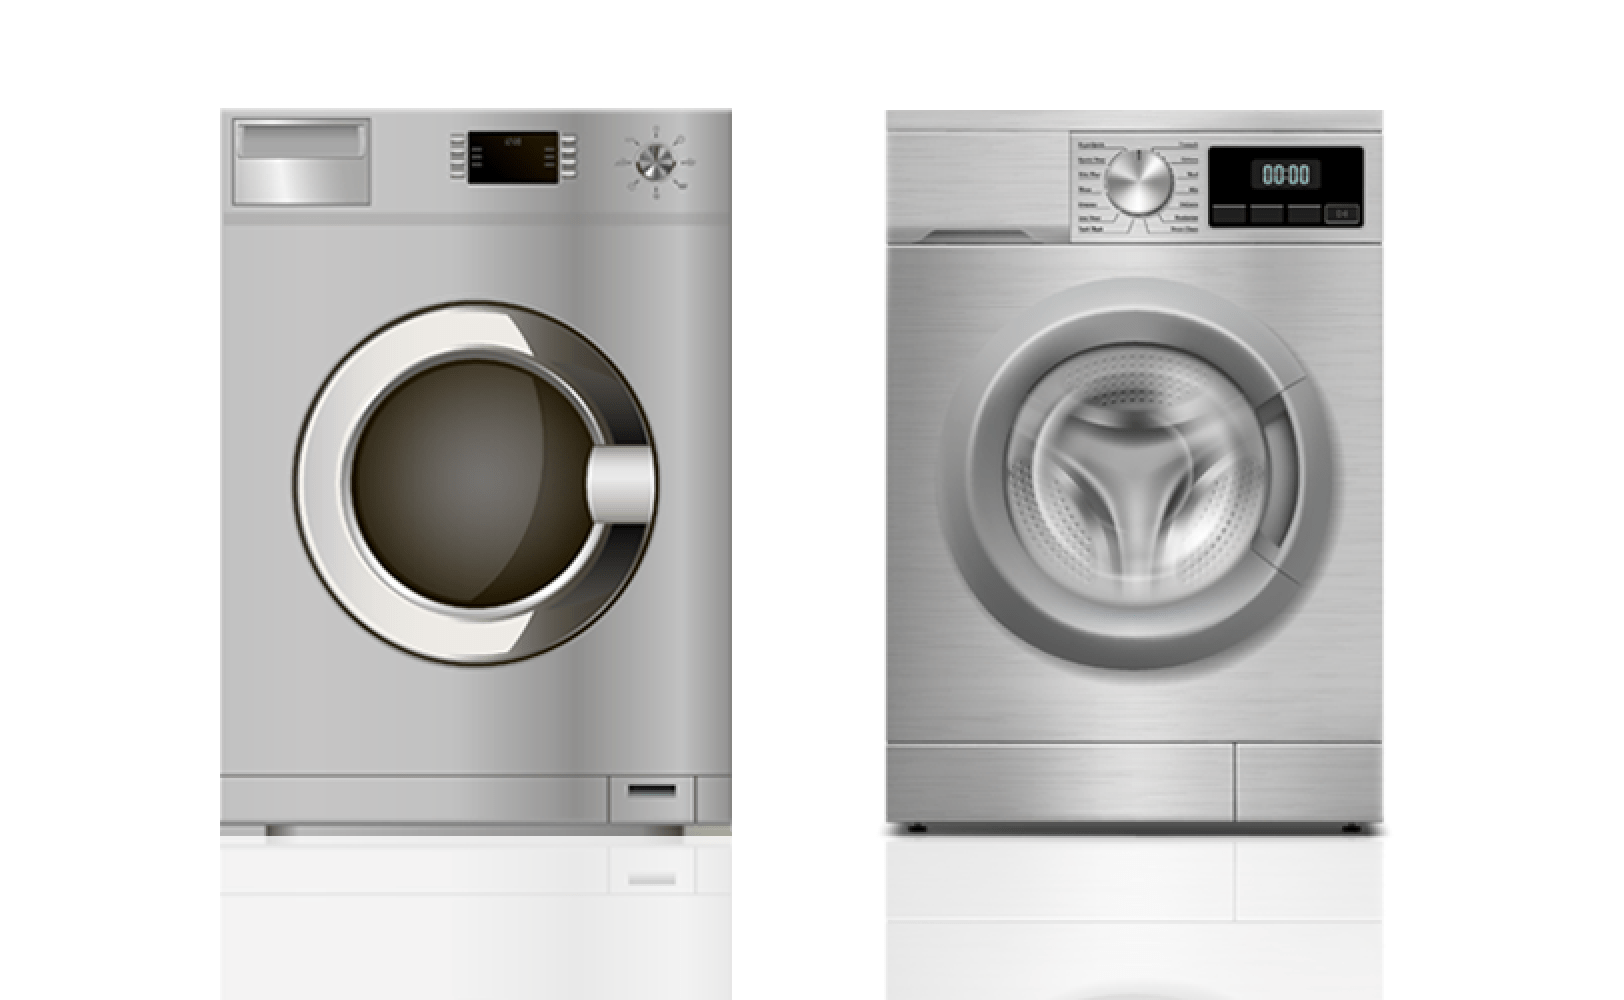 Washer Repair Service in Los Angeles